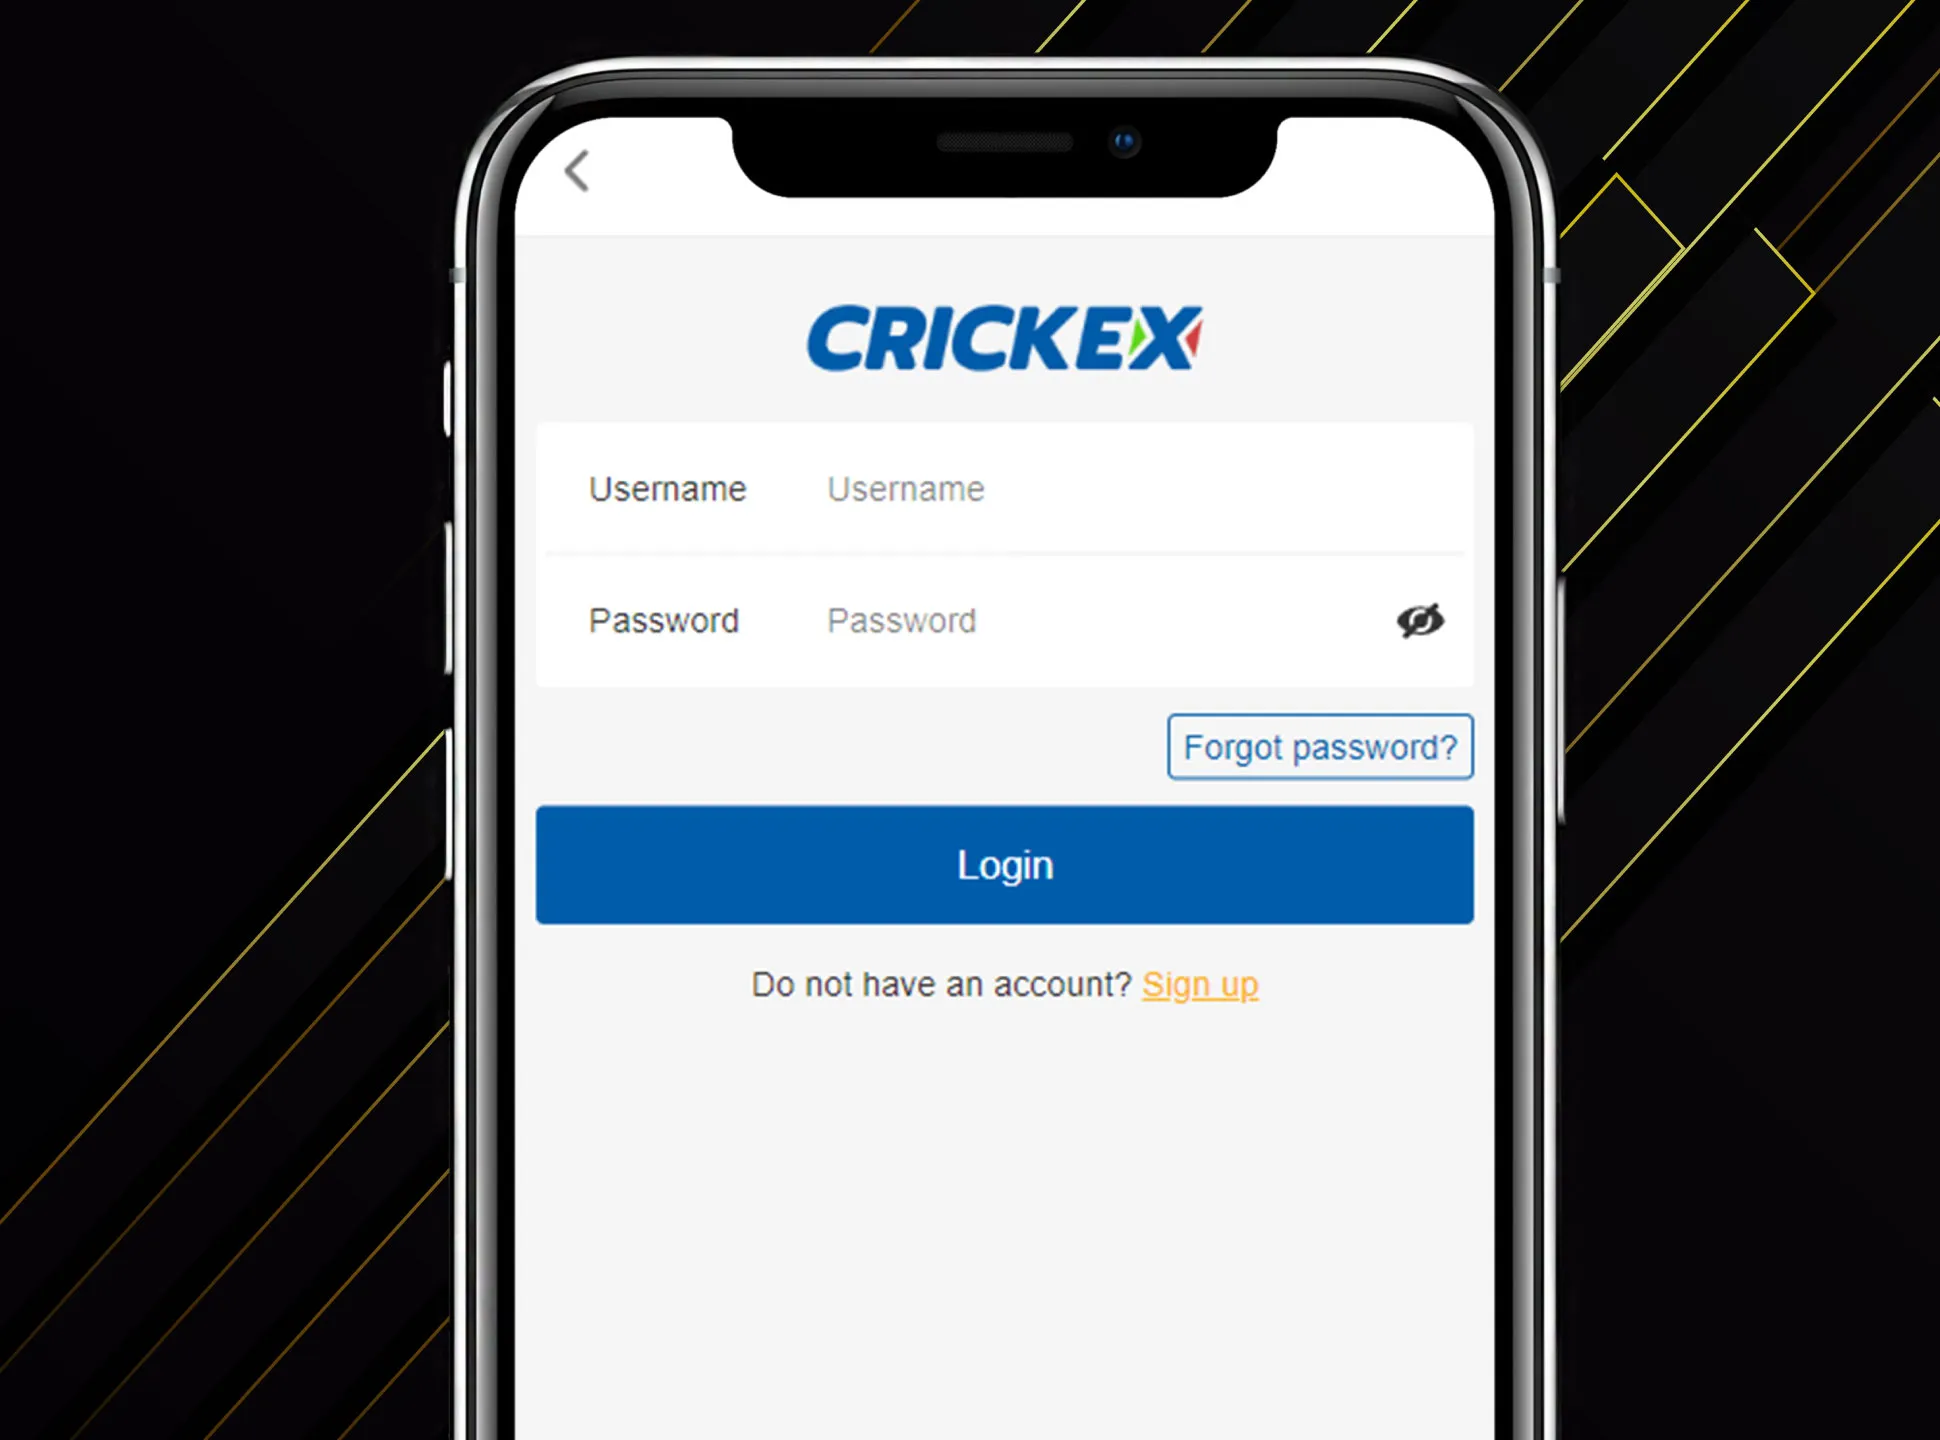 Log in to your Crickex account with a username and a password.